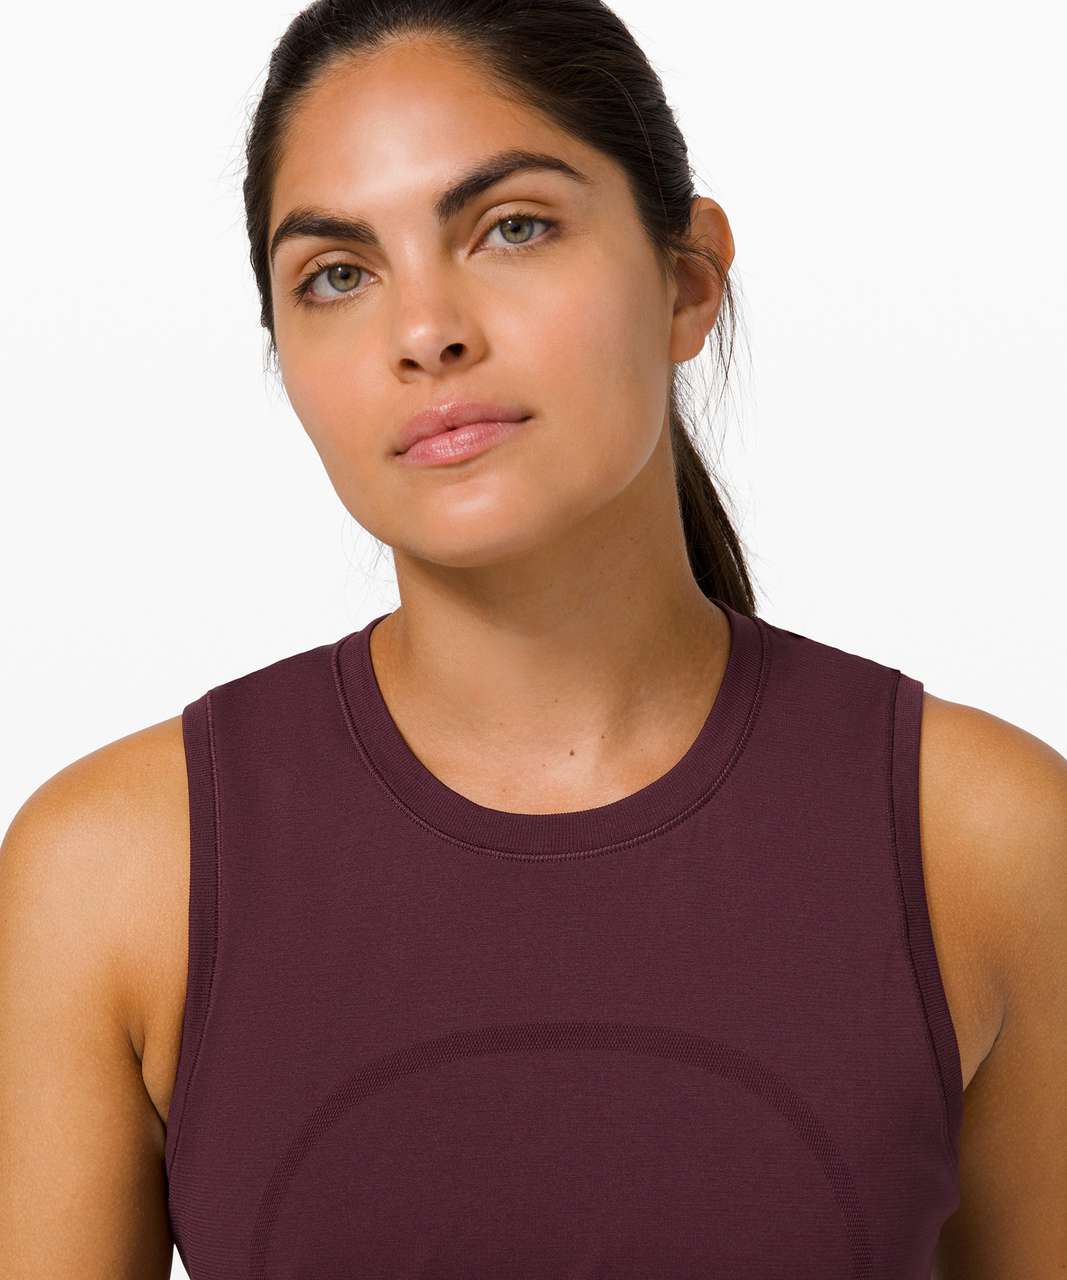 Lululemon Swiftly Breathe Muscle Tank - Cassis / Cassis